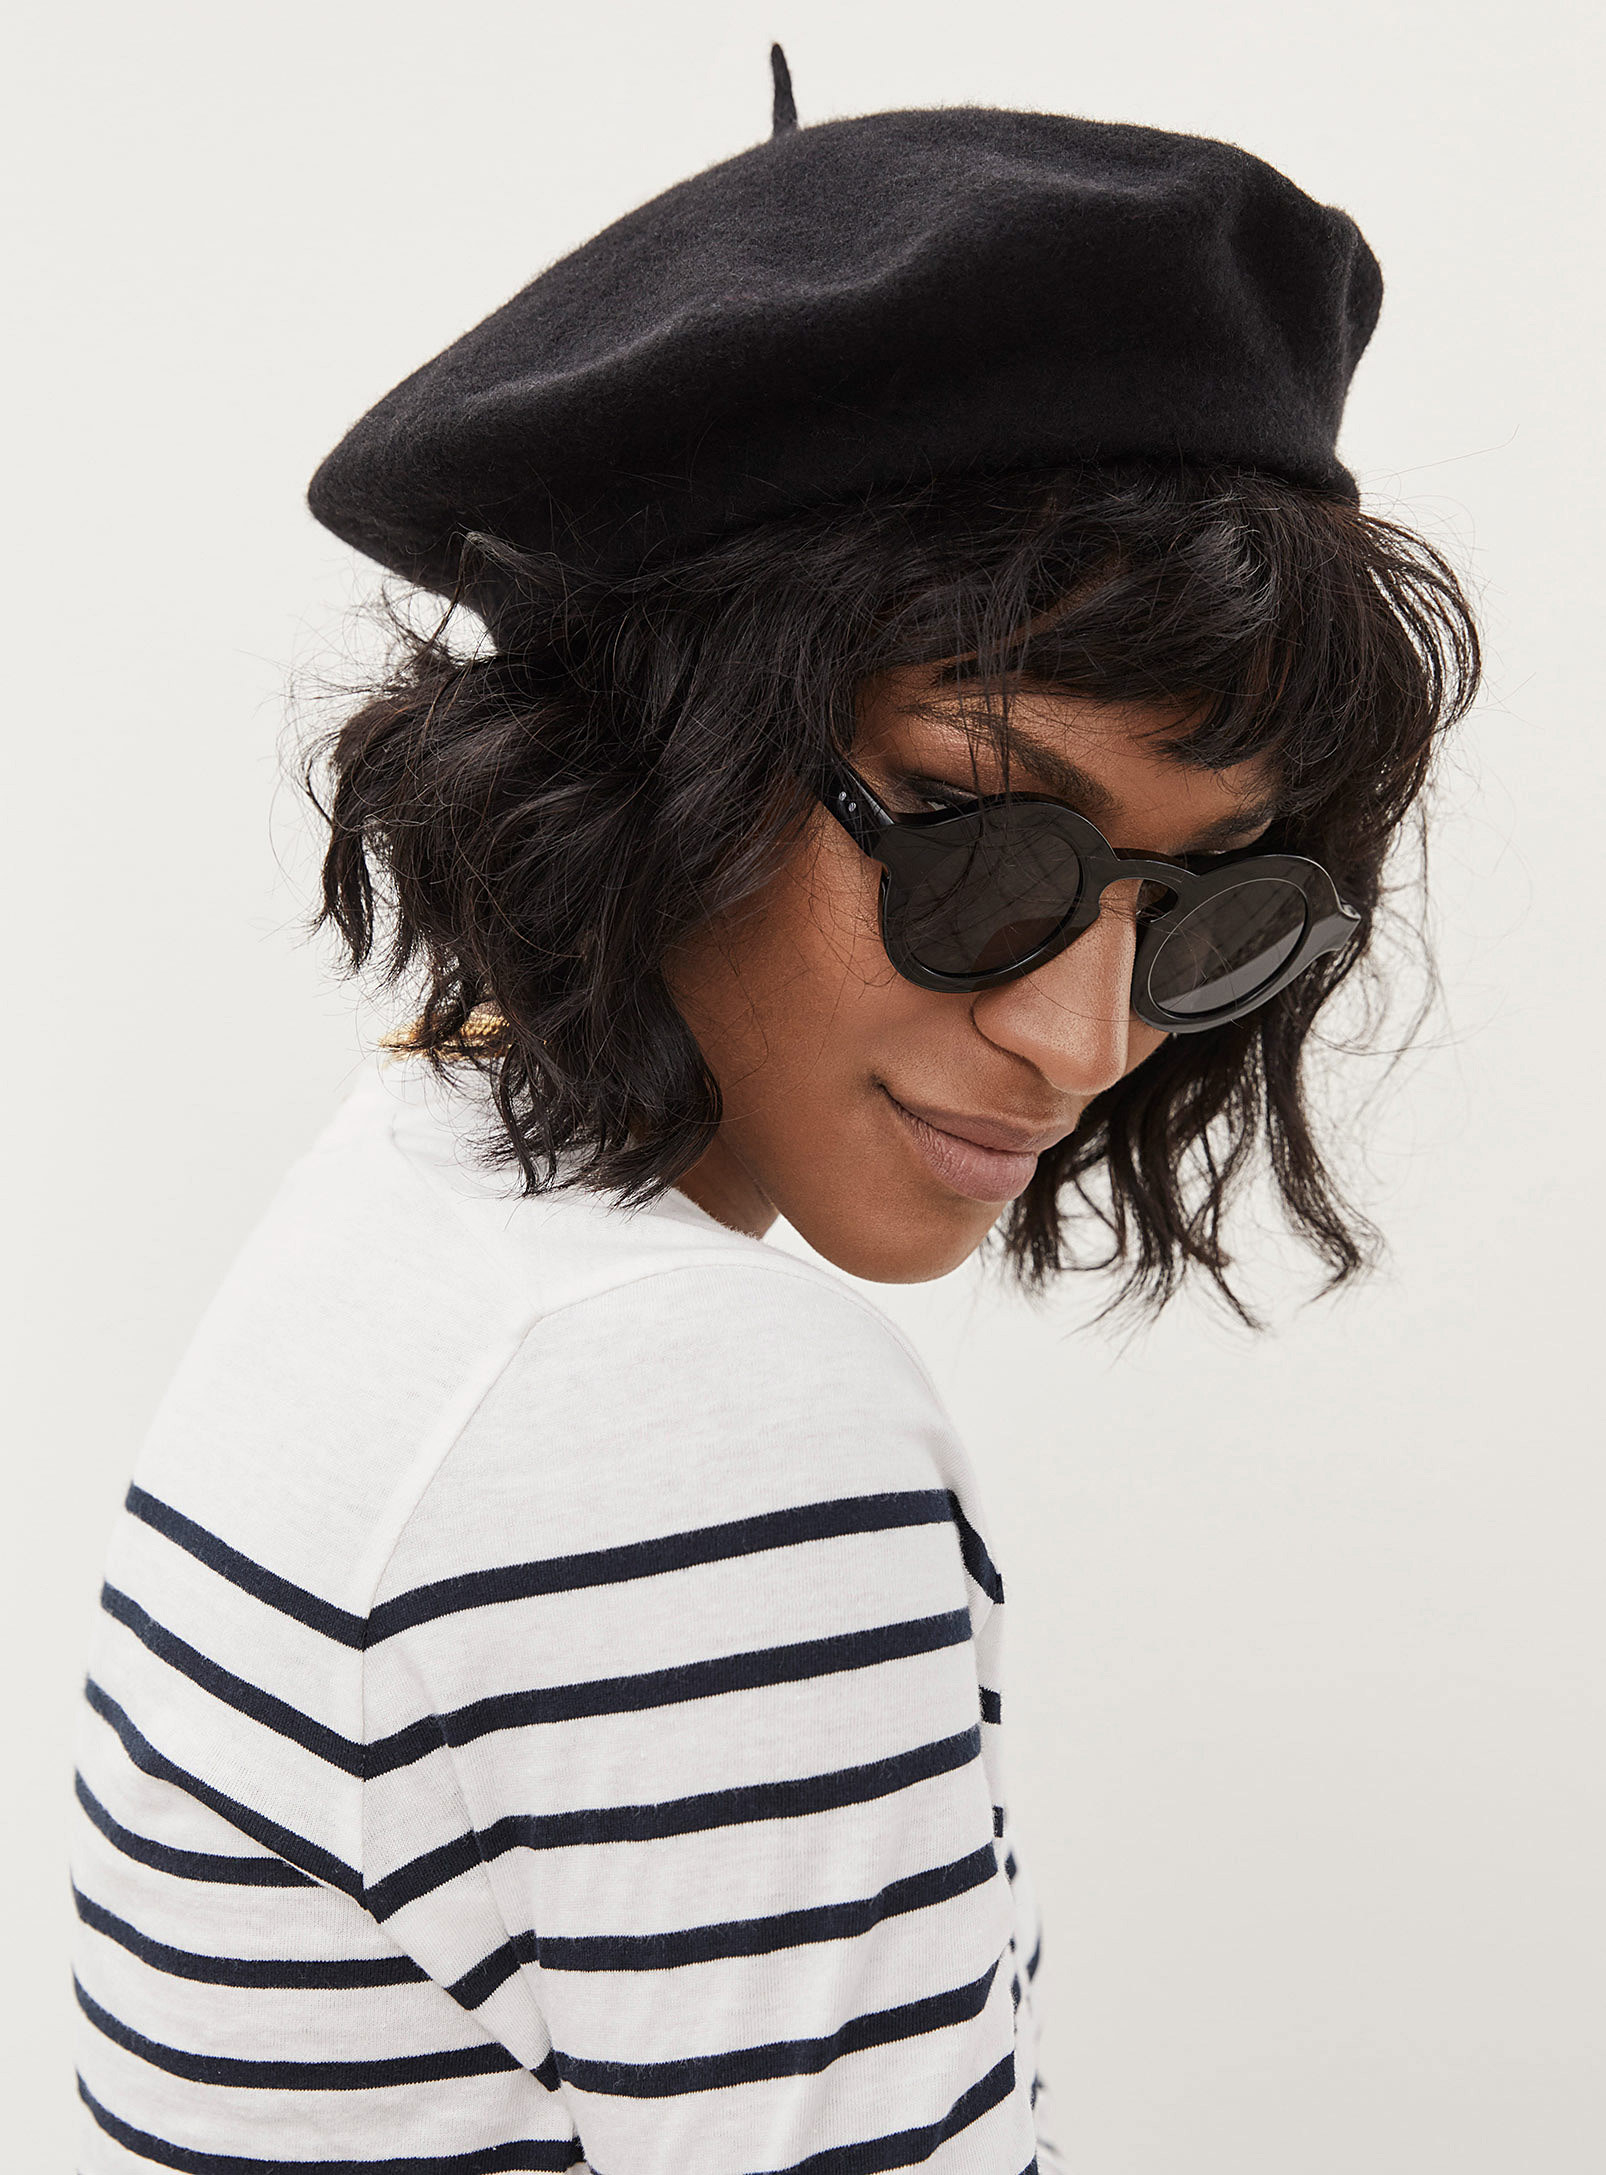 A person wearing a beret with a striped shirt and sunglasses